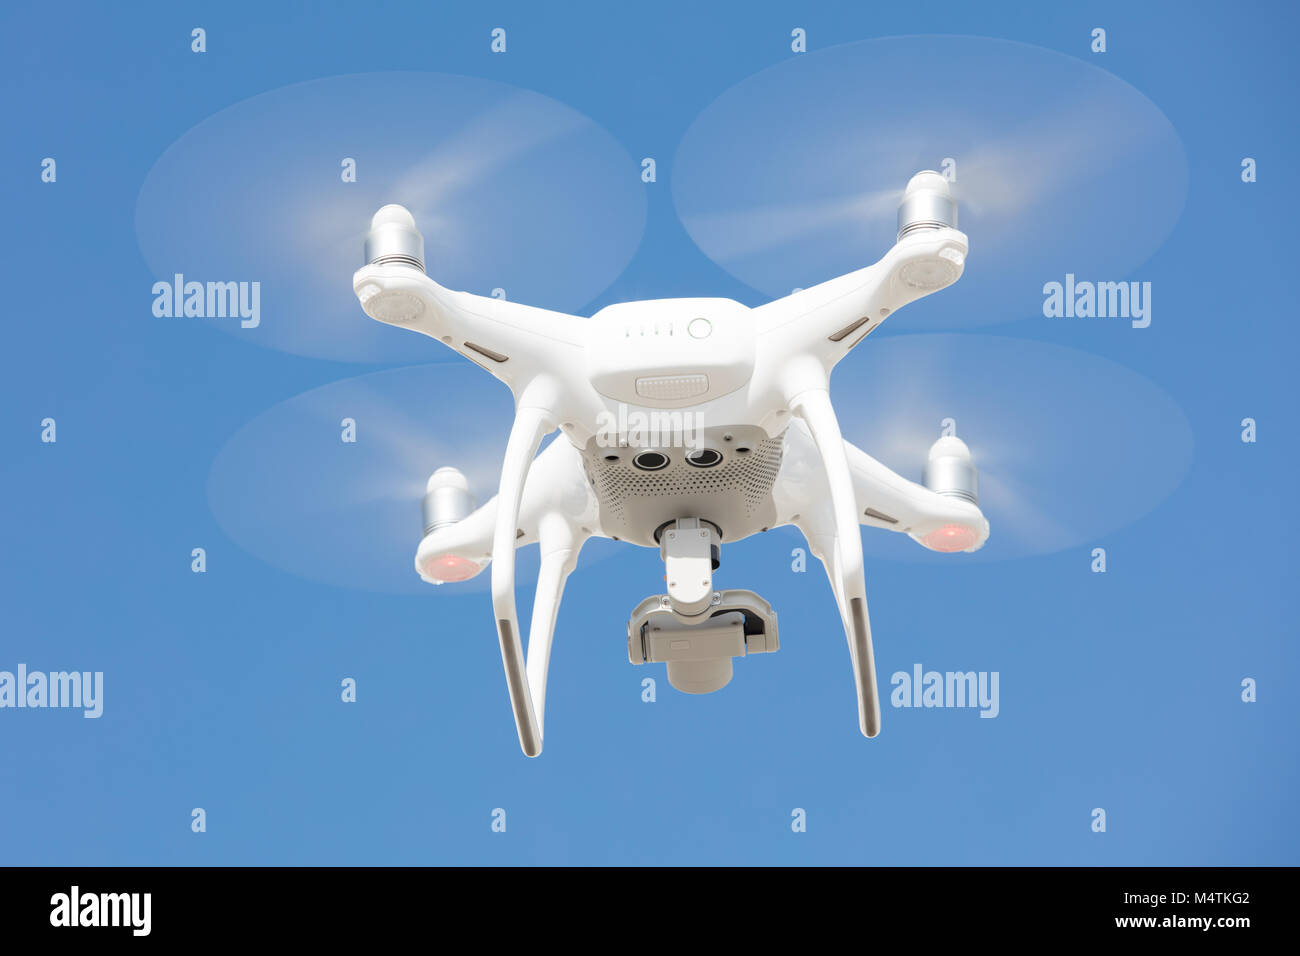 Low angle view of drone flying against blue sky Stock Photo